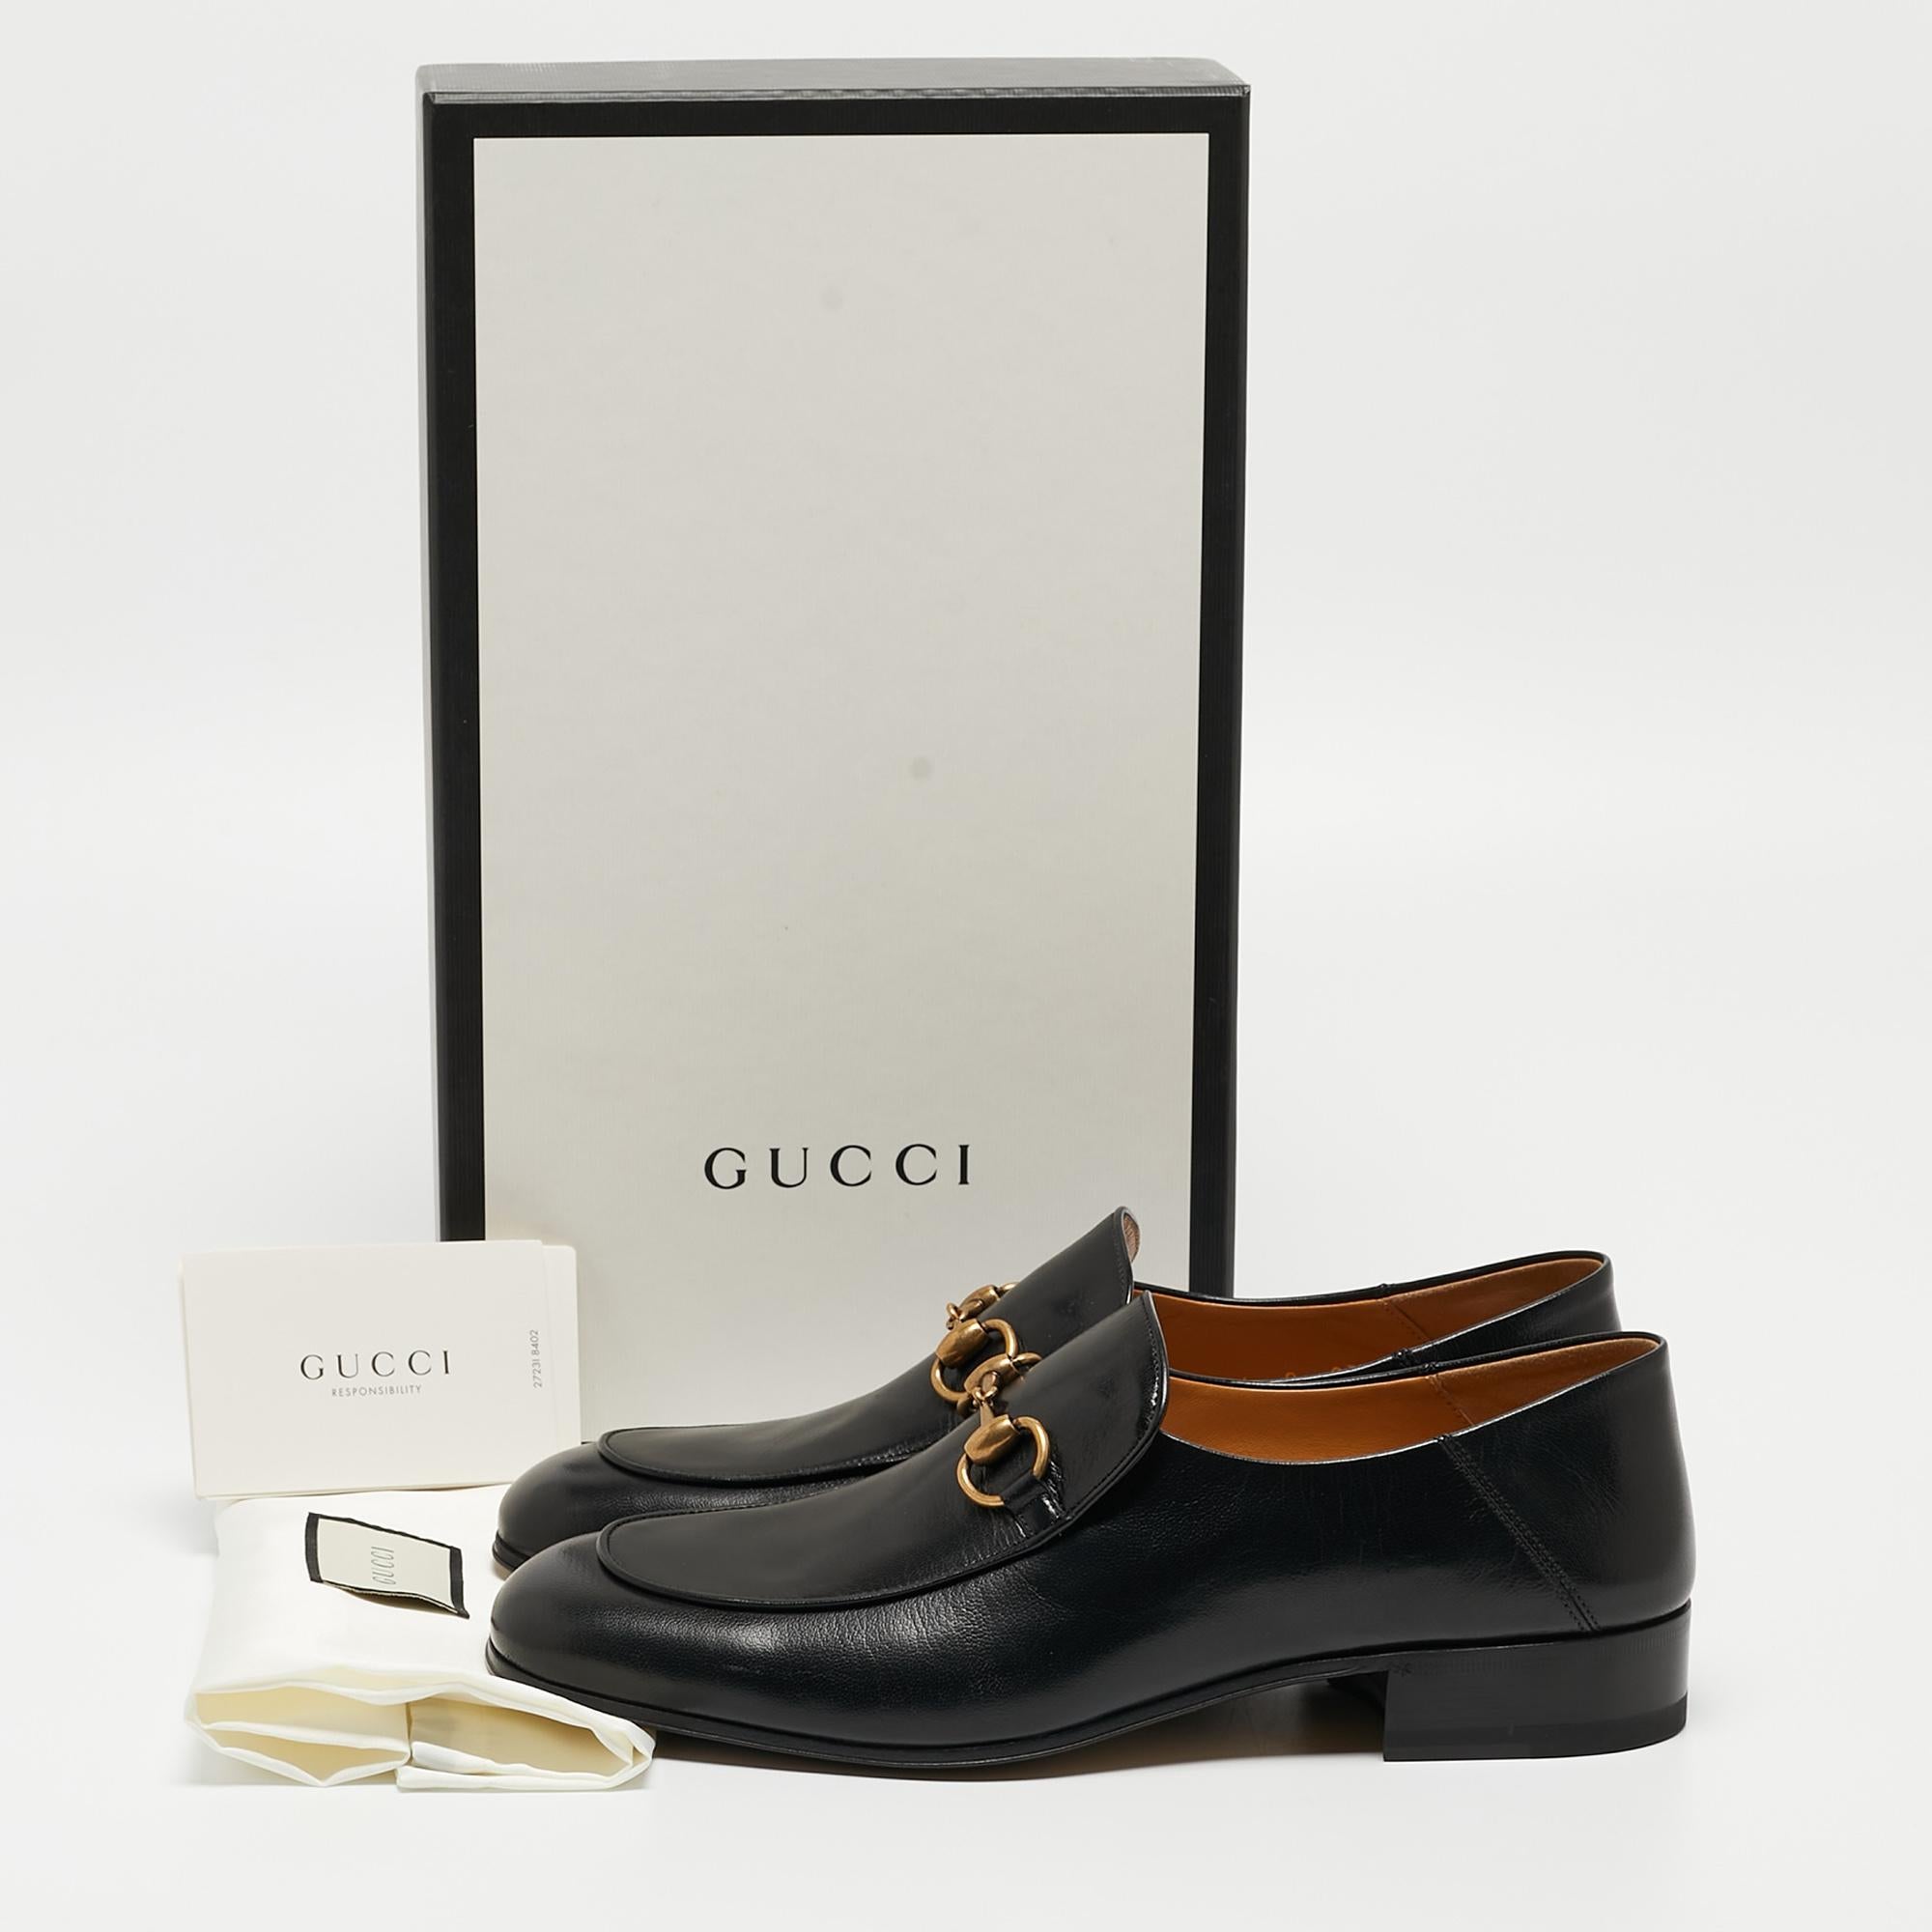 Gucci Black Leather Horsebit Slip On Loafers Size 42 6